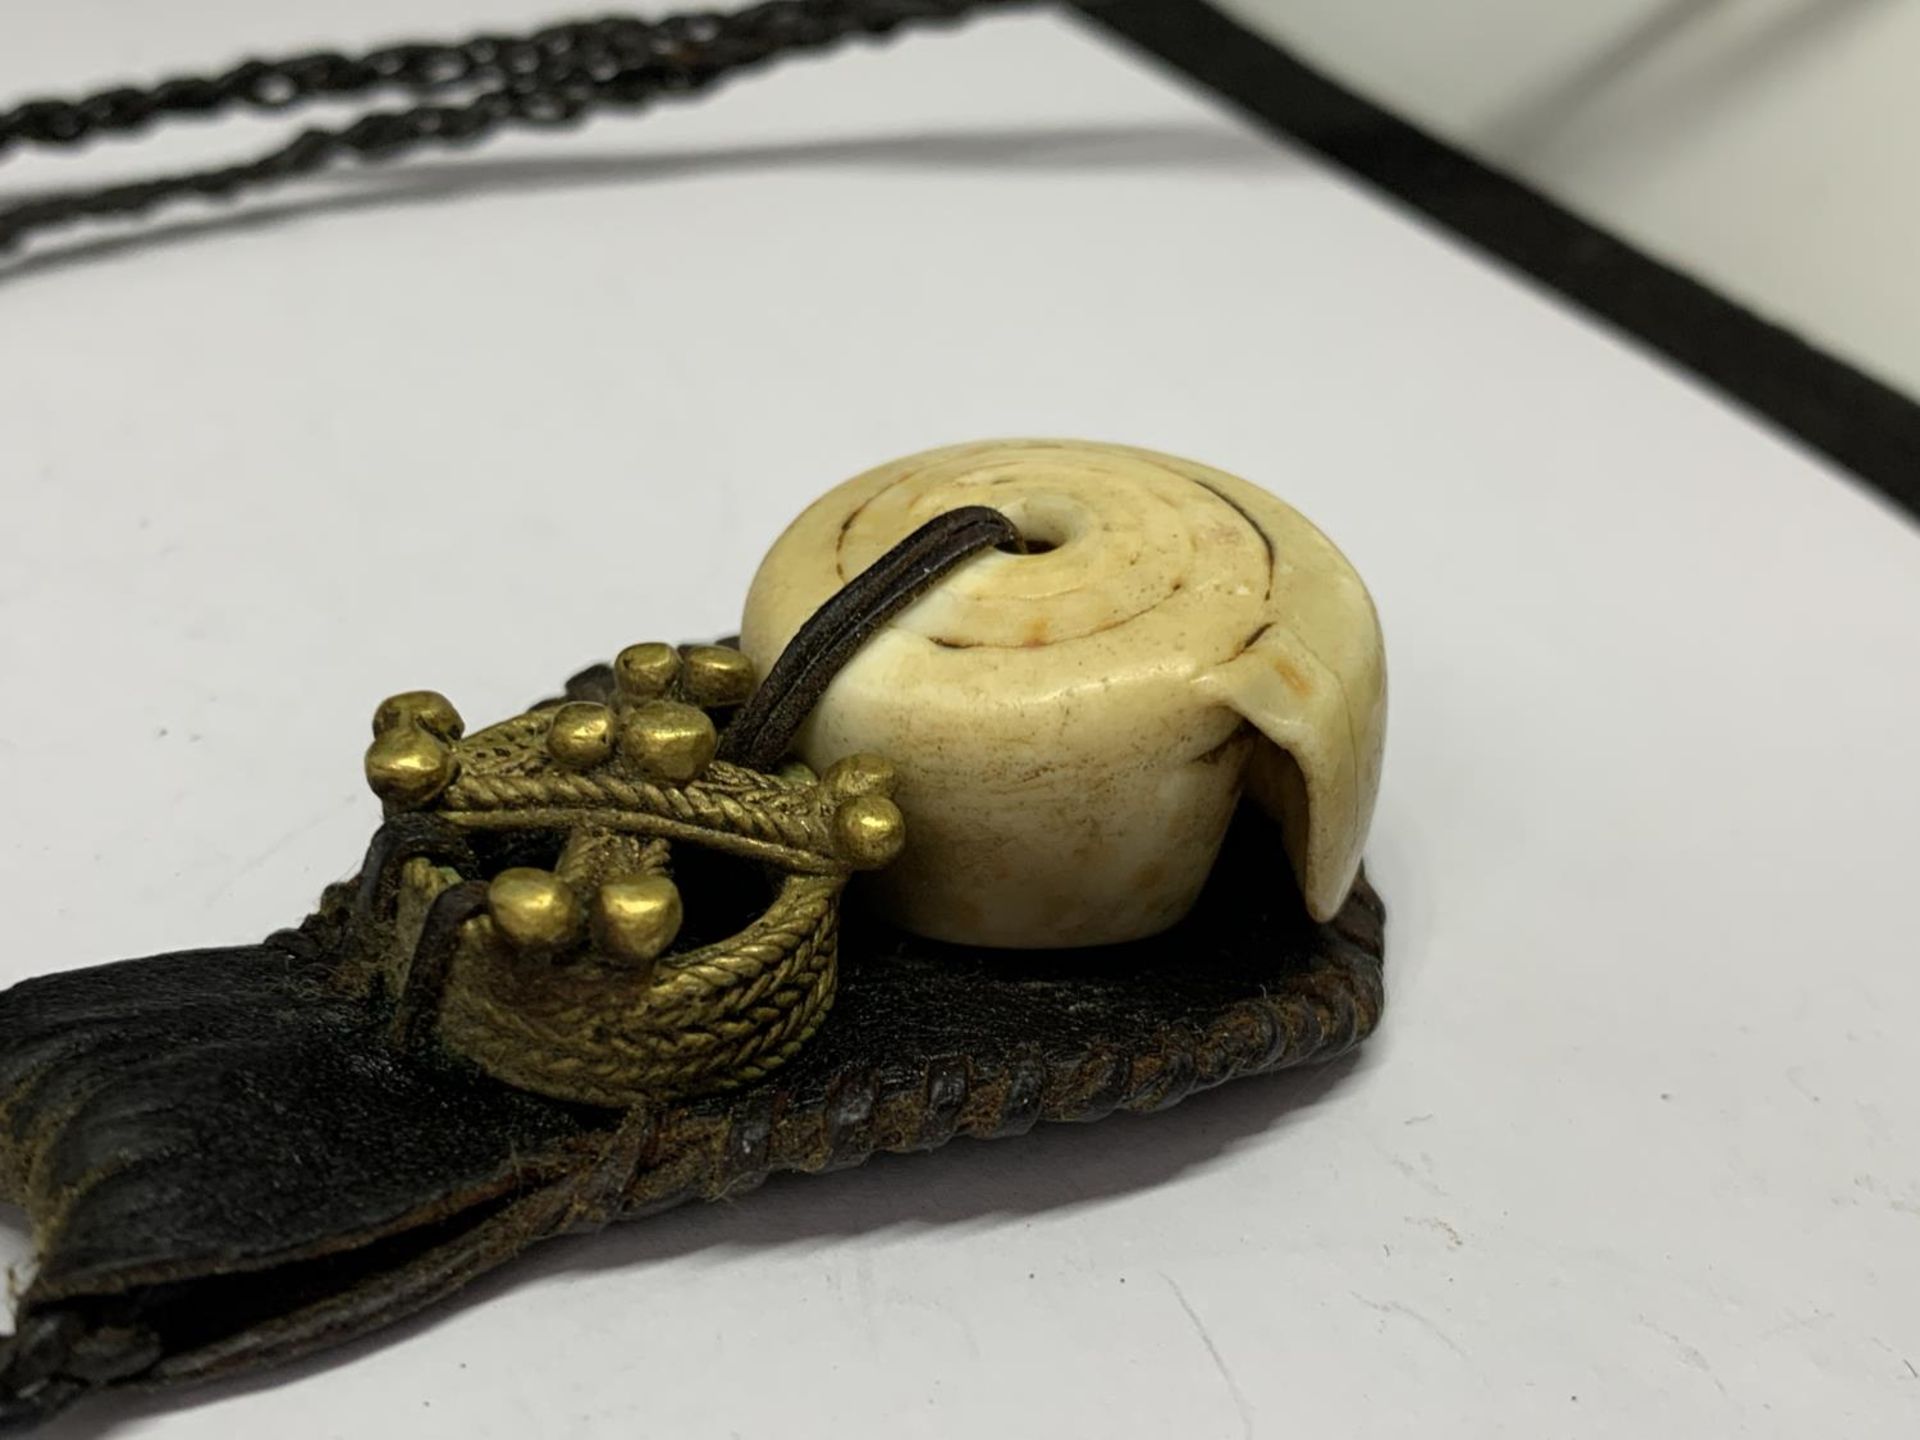 A TALISMAN GOOD LUCK AMULET ON LEATHER CORD - Image 4 of 4